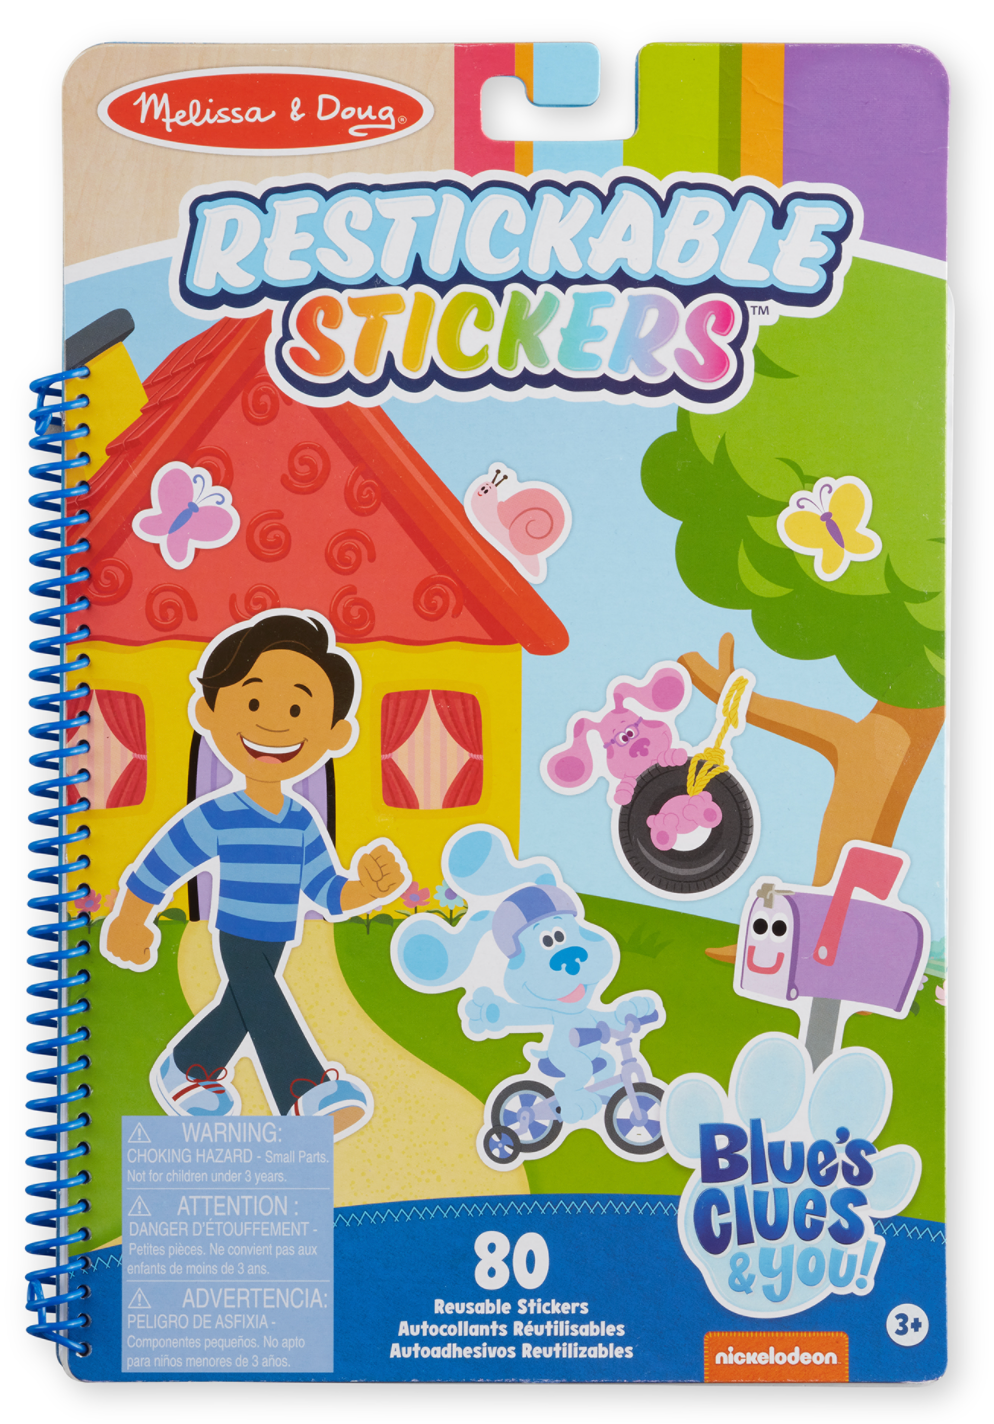 Blue's Clues & You! Restickerable Stickers - Places Blue Loves